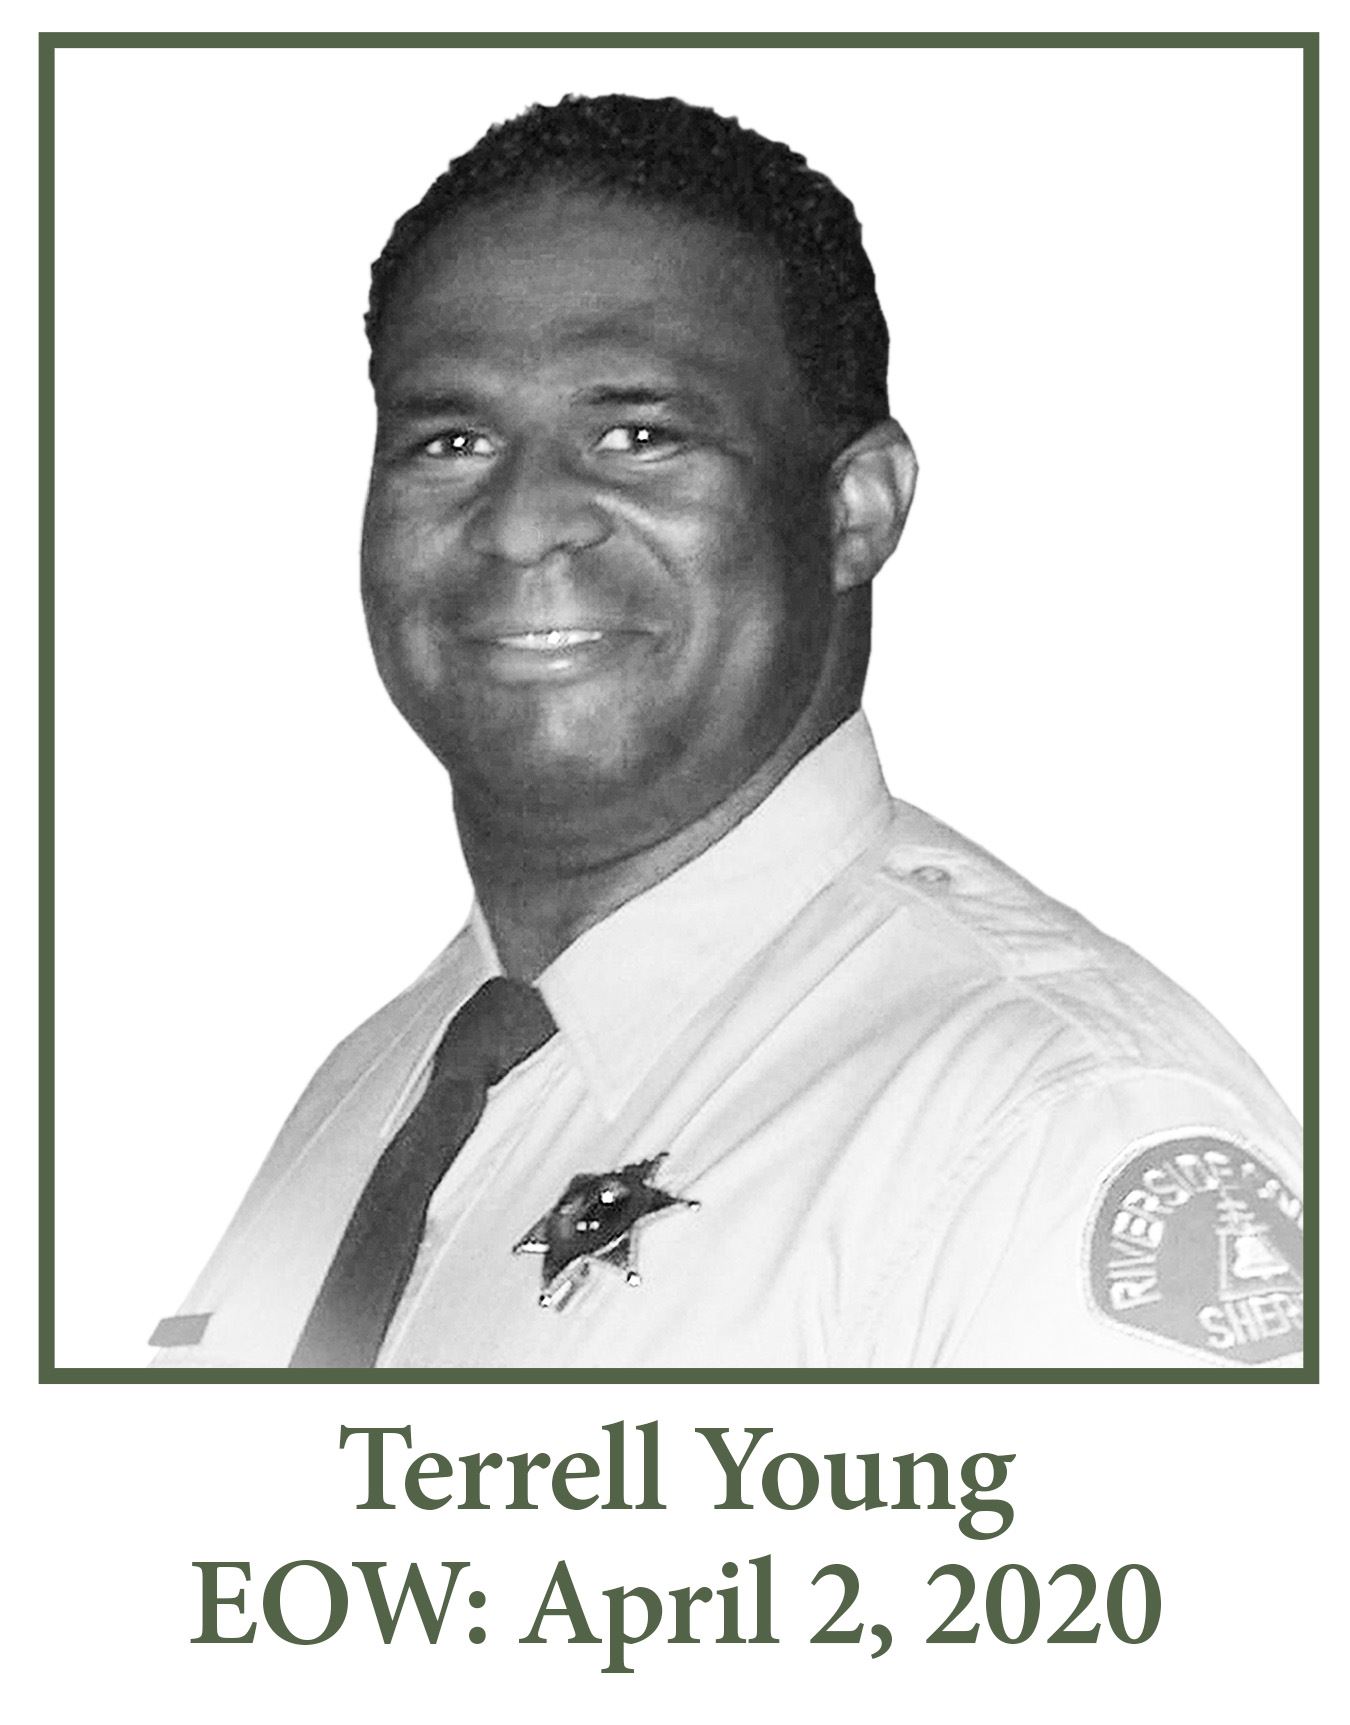 Terrell Young EOW April 2 2020